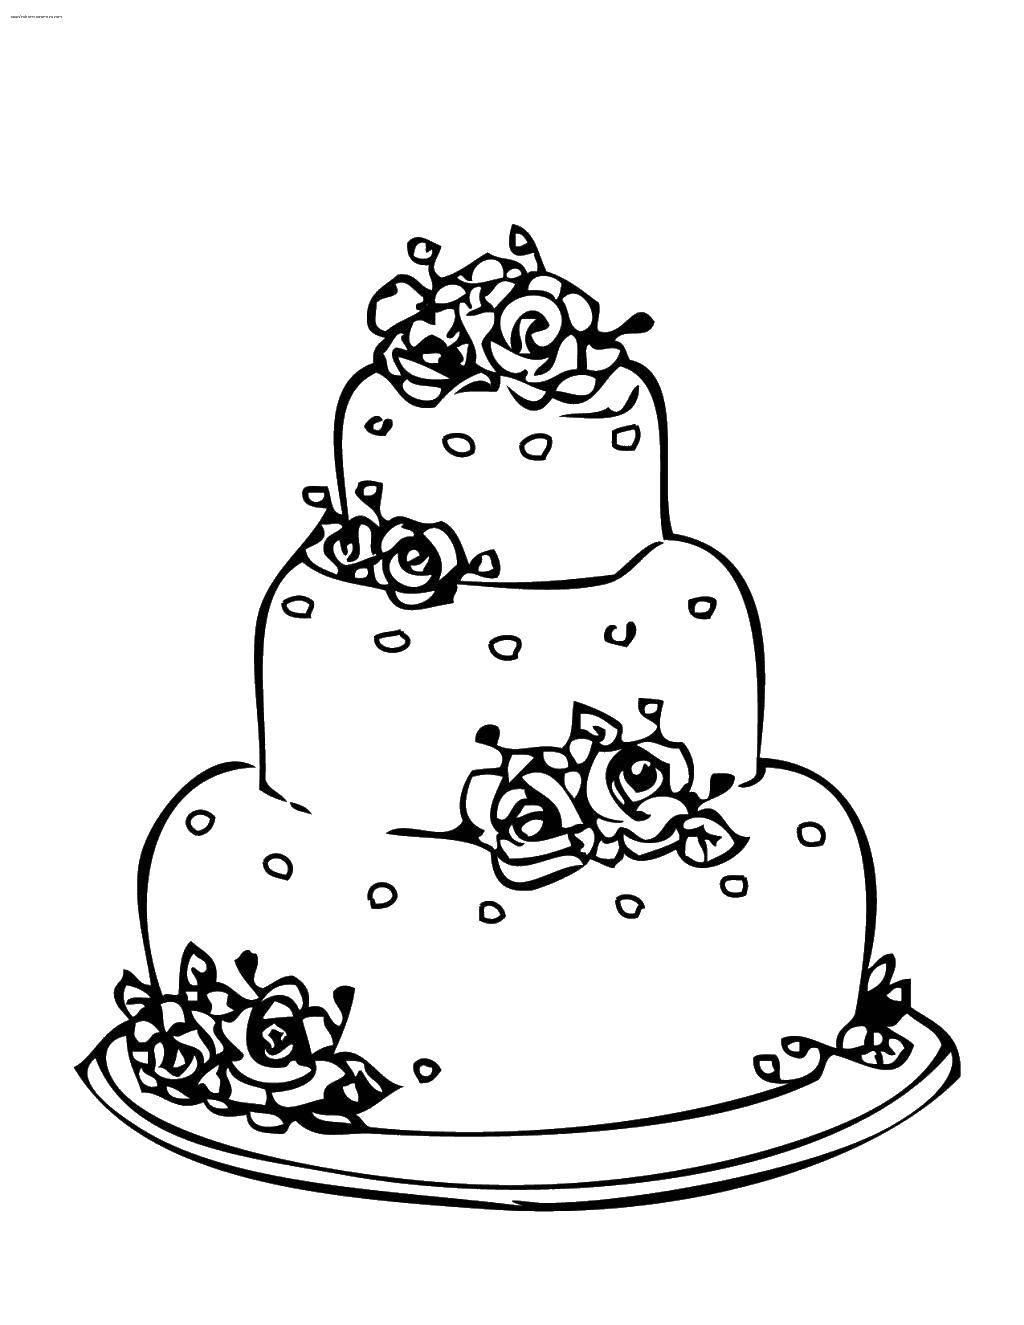 Online coloring pages Coloring page The wedding cake Wedding ...